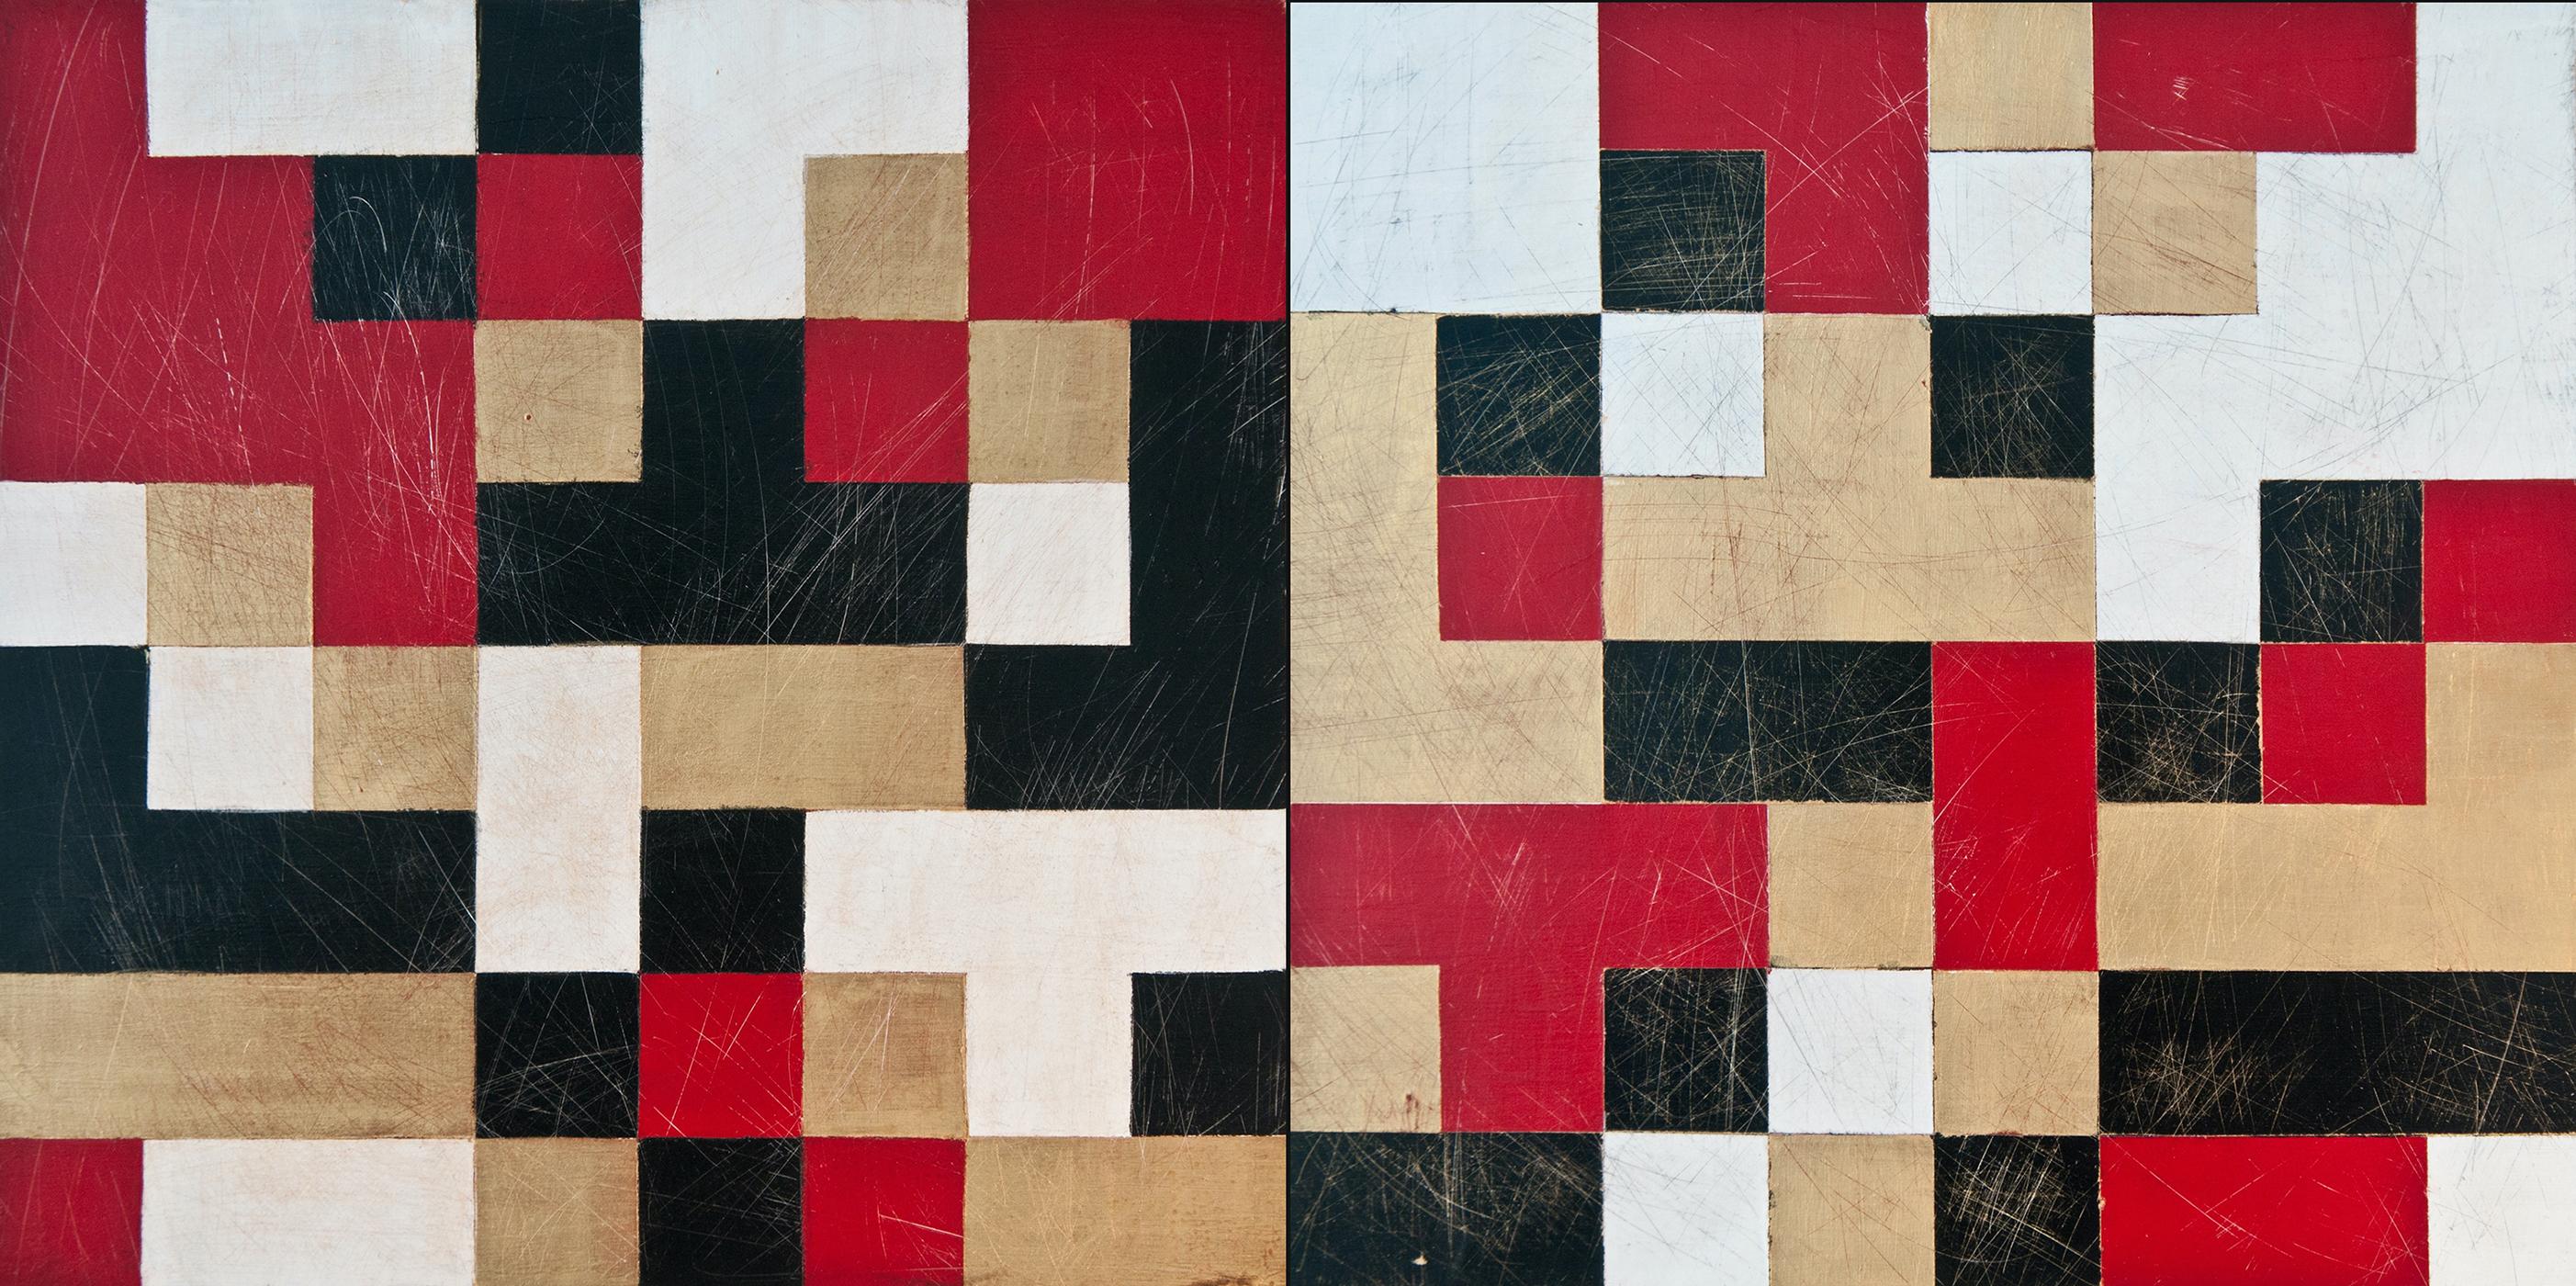 "Cipher Twenty (Sense + Antisense)", abstract, geometric, red, acrylic painting - Painting by Denise Driscoll